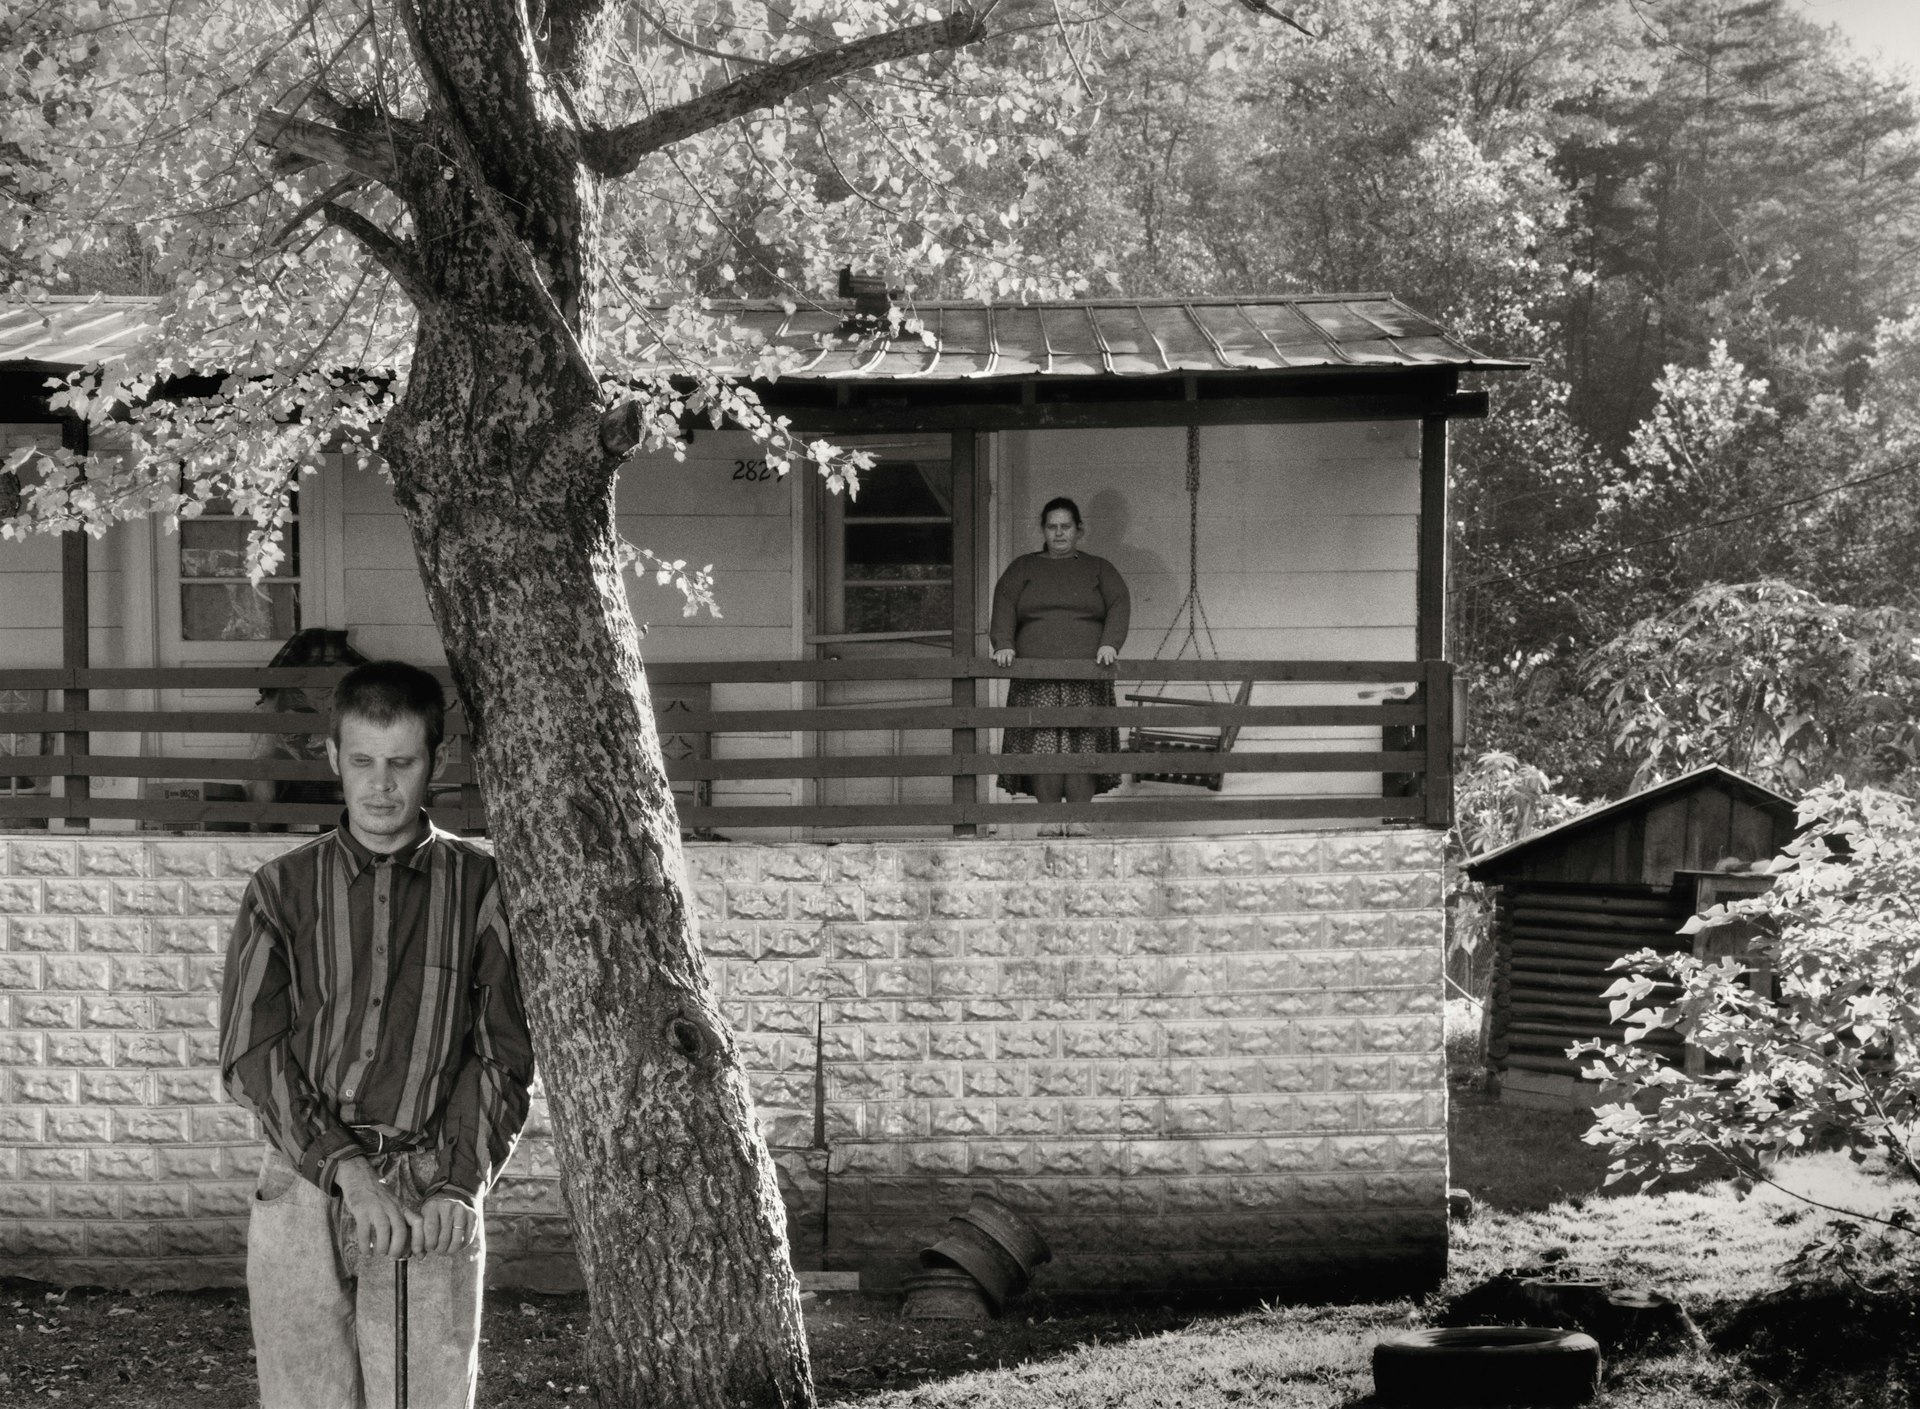 Striking portraits of life in the Appalachian Mountains